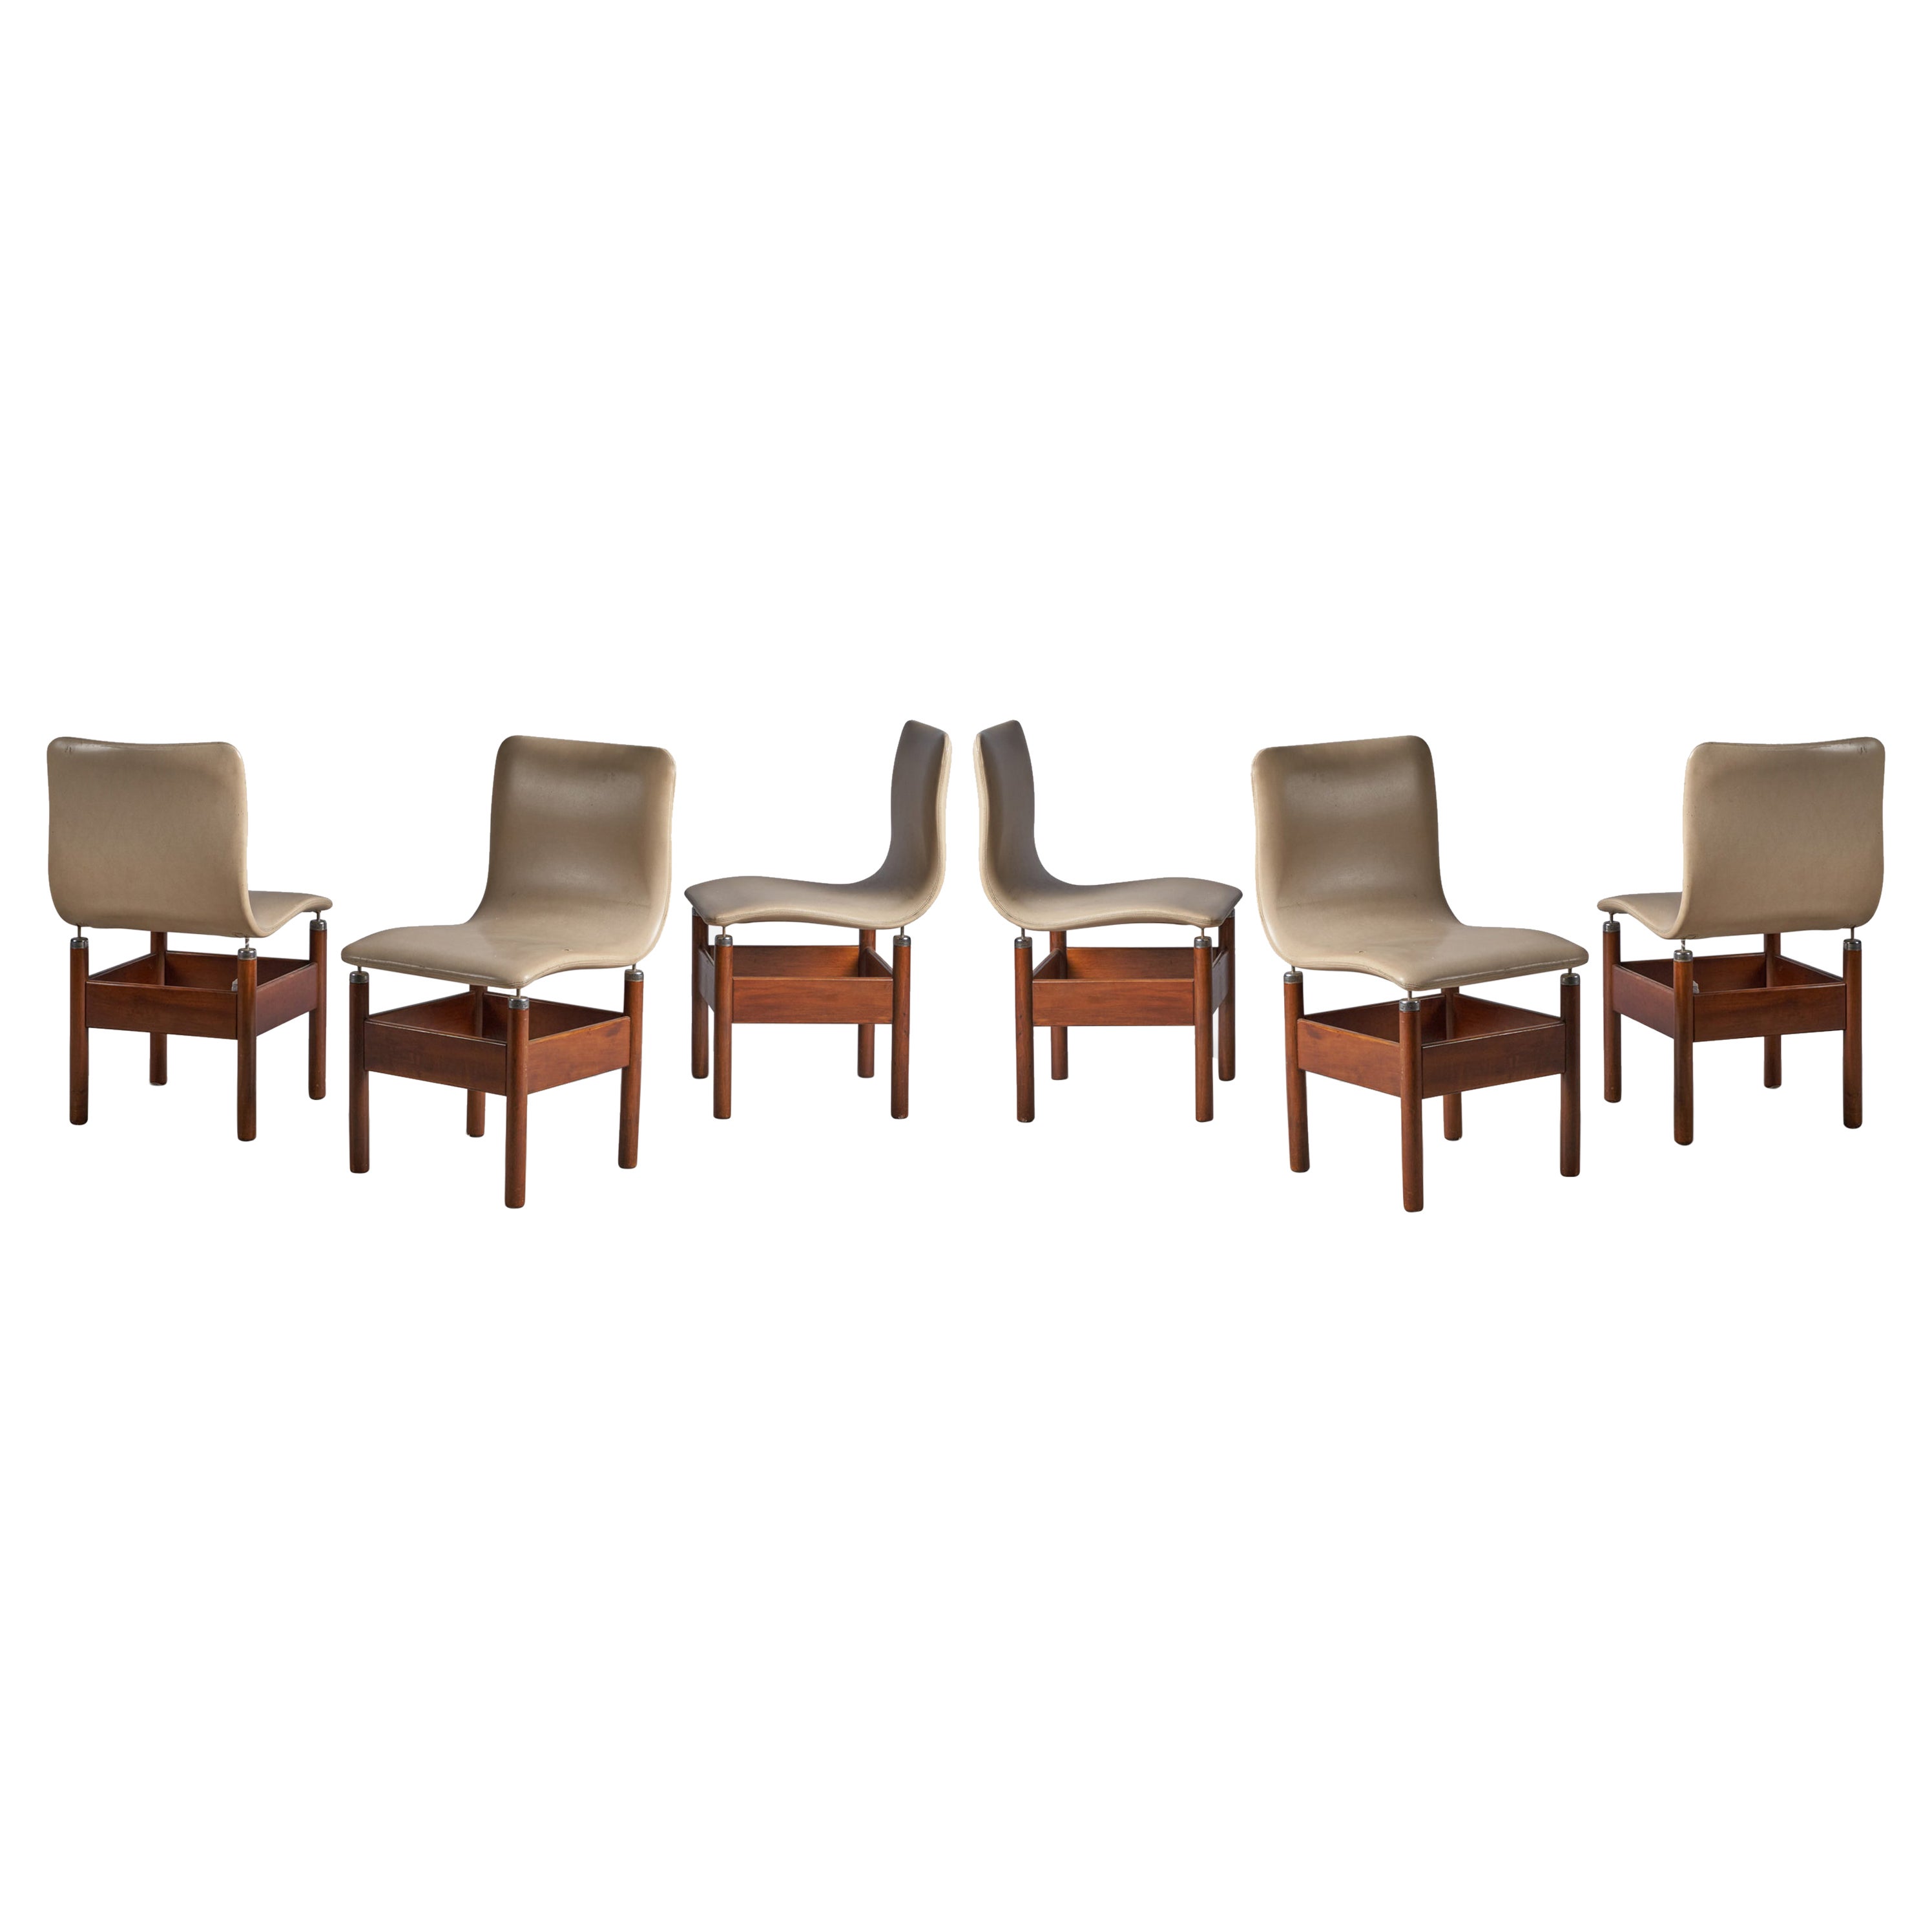 Vittorio Introini, "Chelsea" Dining Chairs Leather Walnut Metal, Italy 1960s For Sale